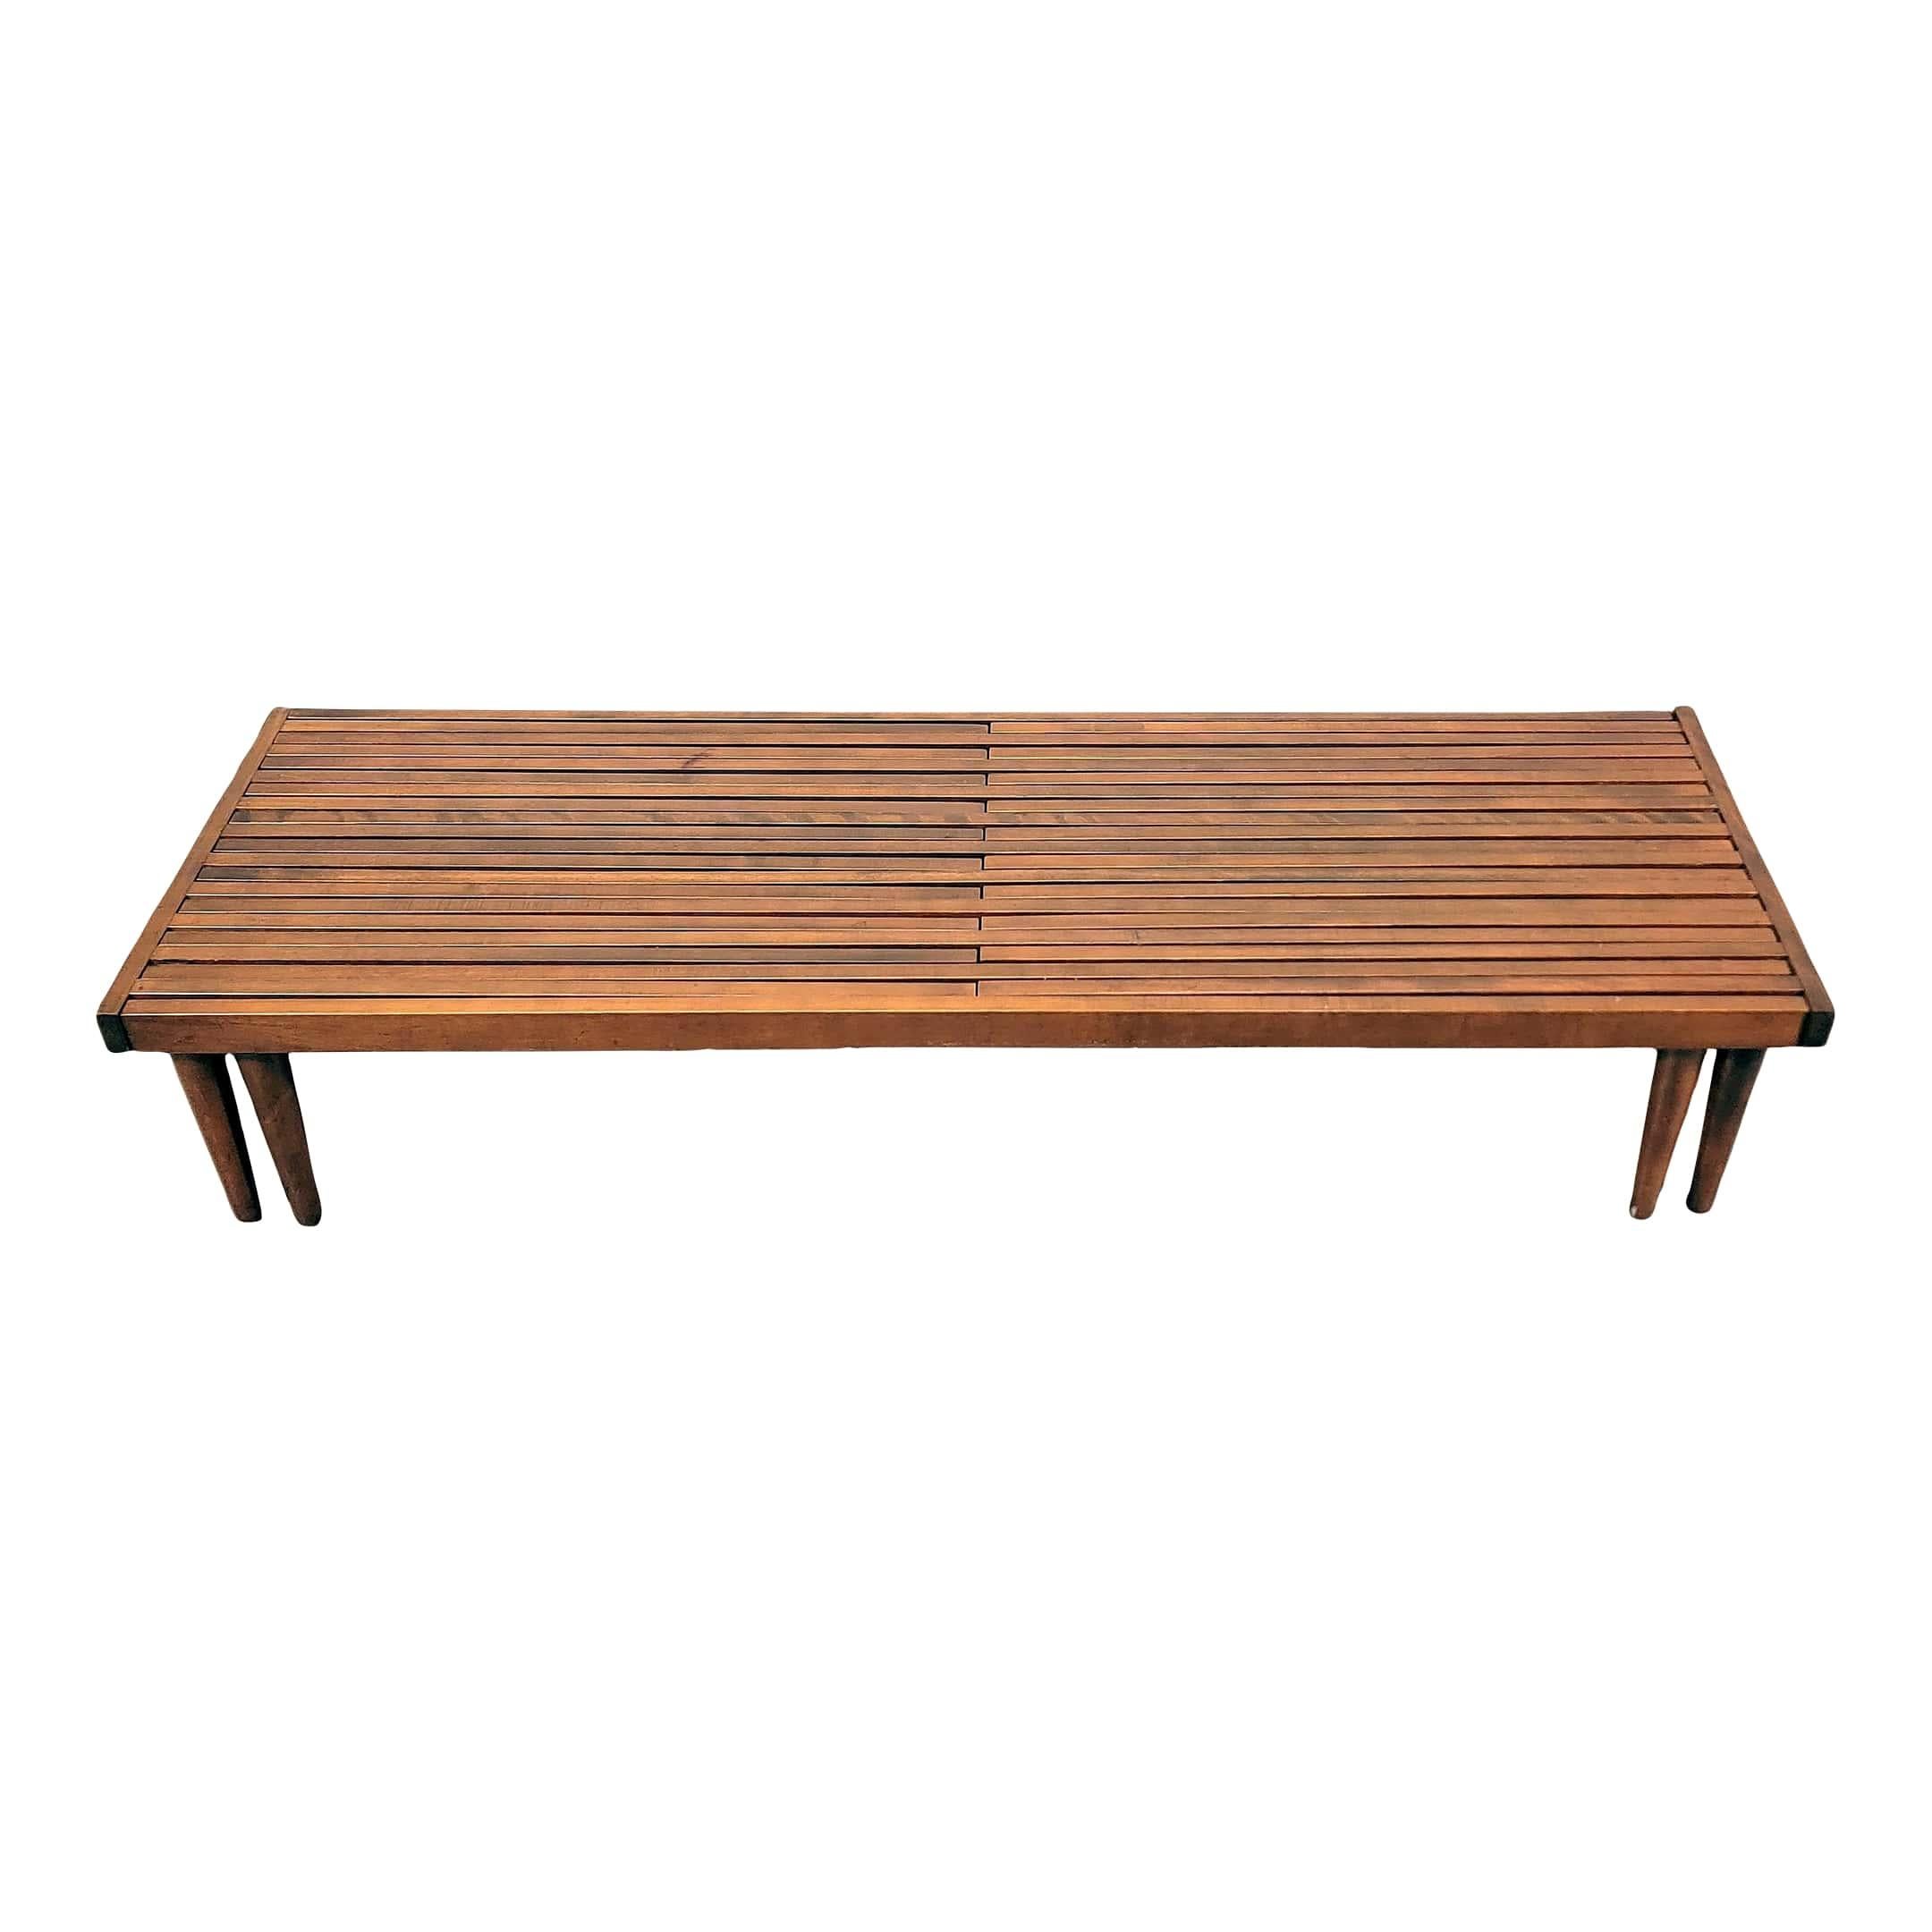 Midcentury Brown Saltman expandable slat bench designed by John Keal. This ingenious design has two ends that pull-out extending to almost 94” long. A versatile solid walnut bench, that can also be used as a coffee table. In very good vintage